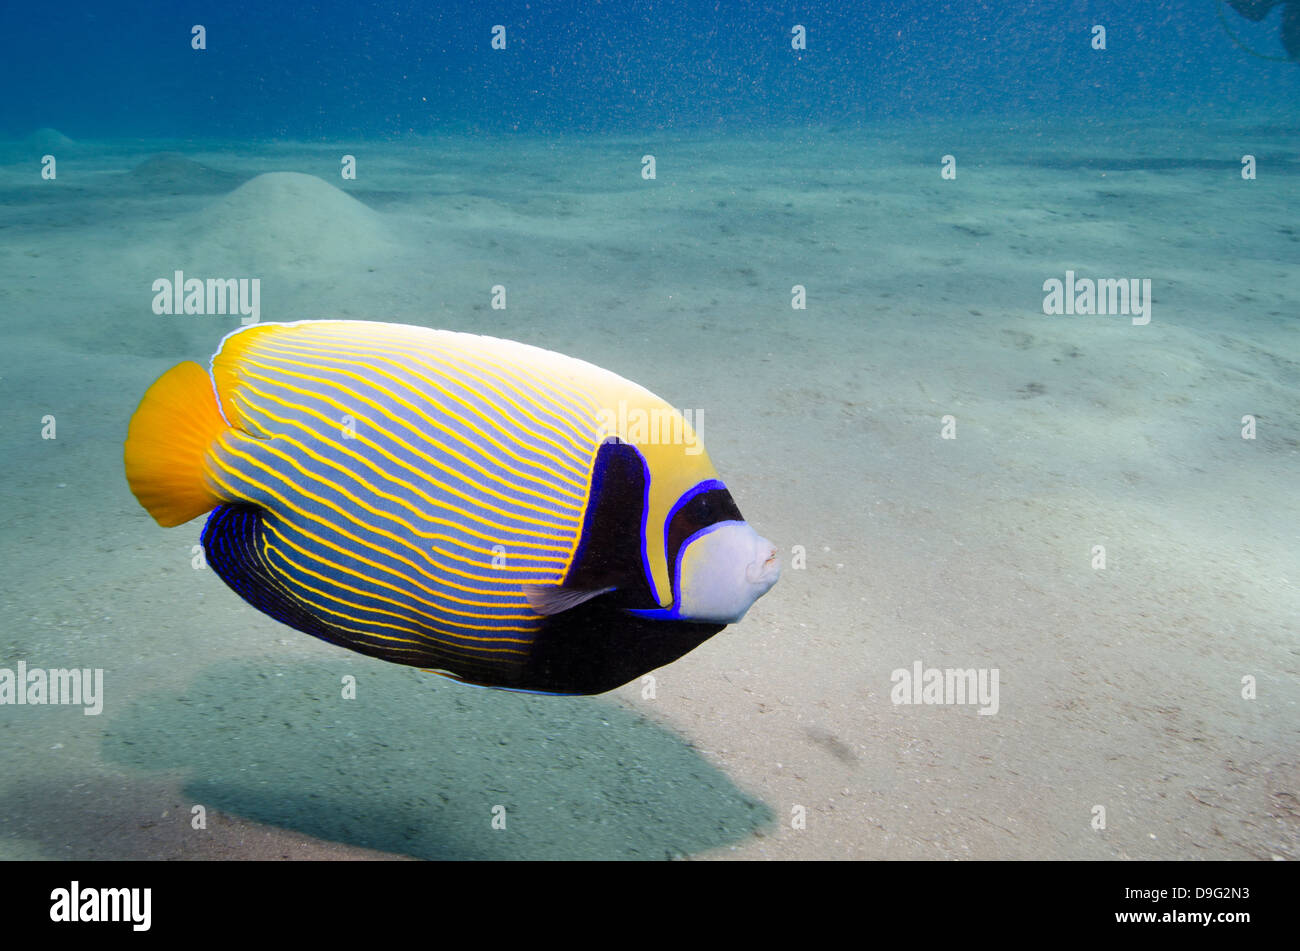 Emperor angelfish (Pomacanthus imperator) close to sandy seabed, Naama Bay, Sharm el-Sheikh, Red Sea, Egypt, Africa Stock Photo